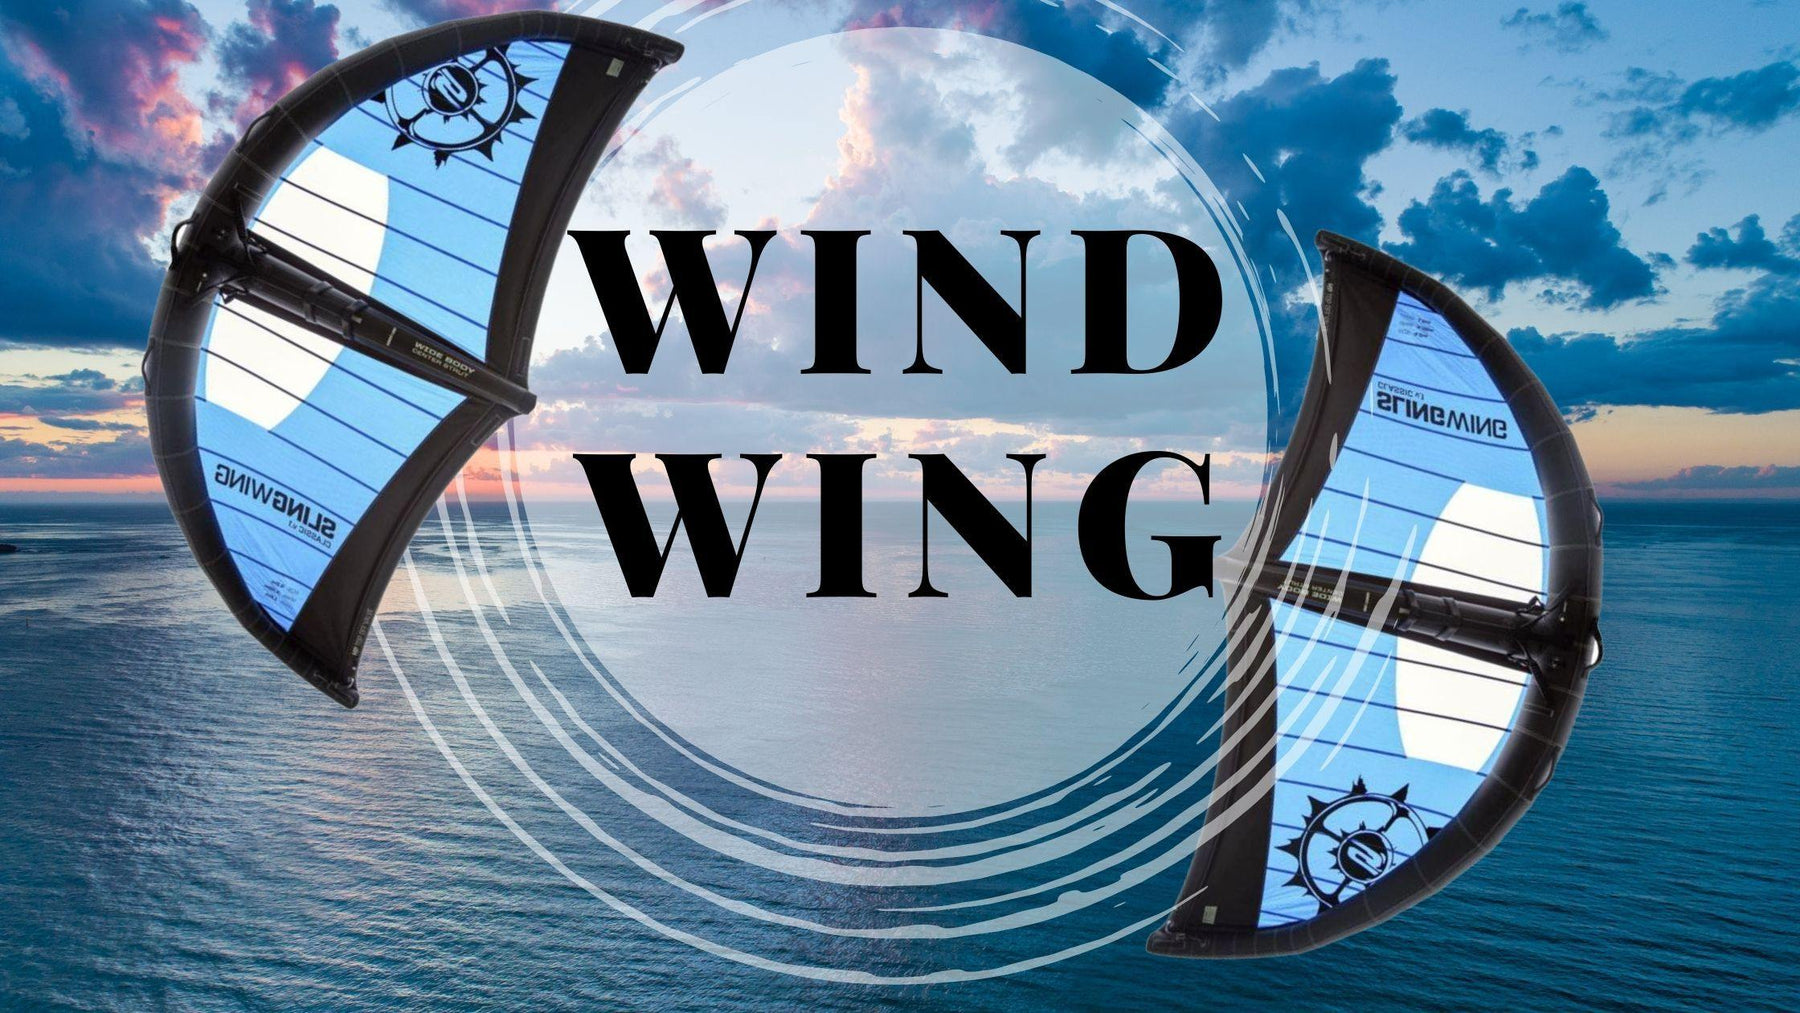 Wind Winging Lessons are Available! - Elite Watersports